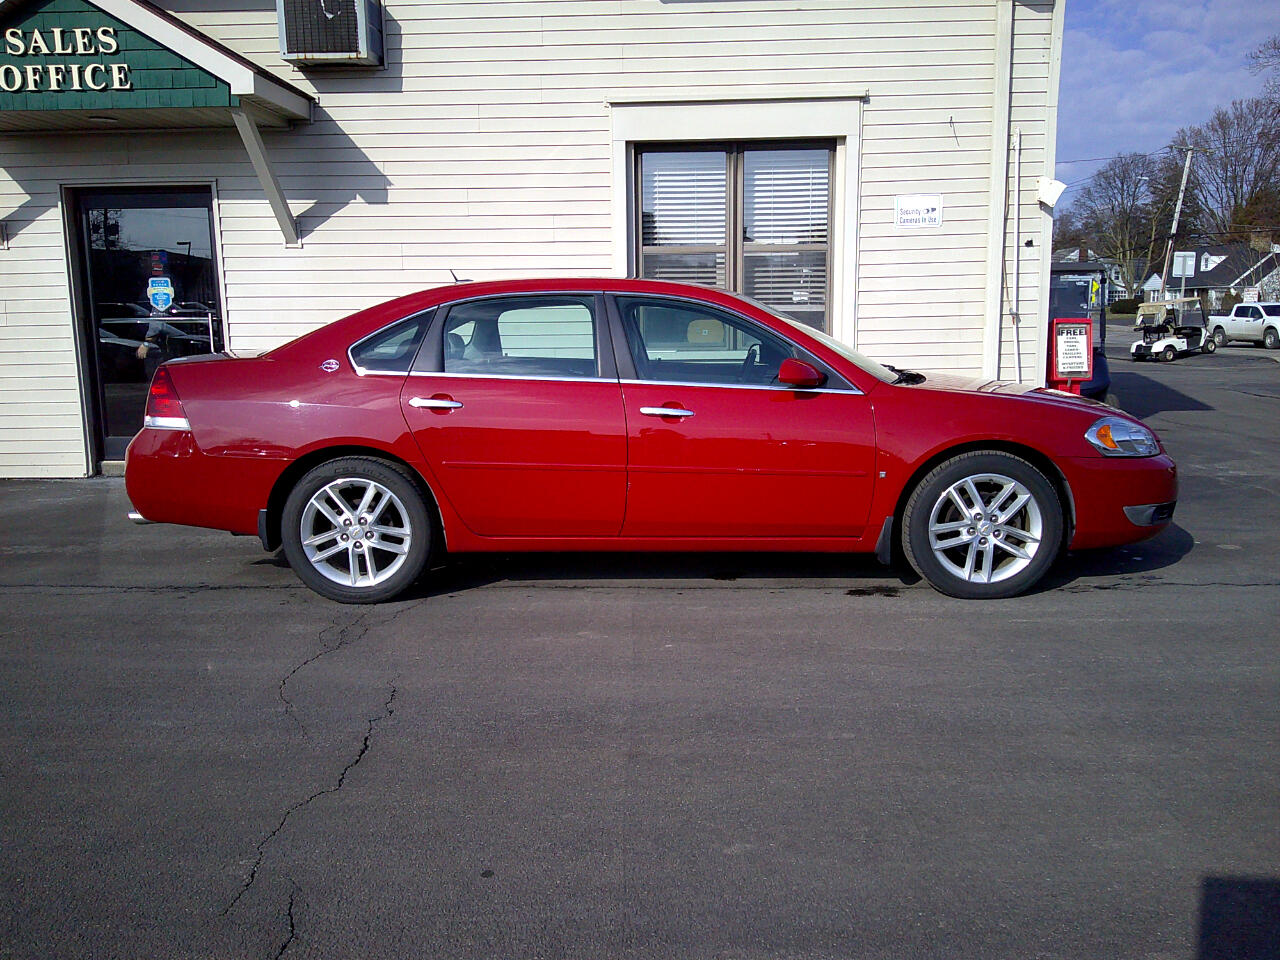 Used 2008 Chevrolet Impala LTZ with VIN 2G1WU583589281040 for sale in Brockport, NY